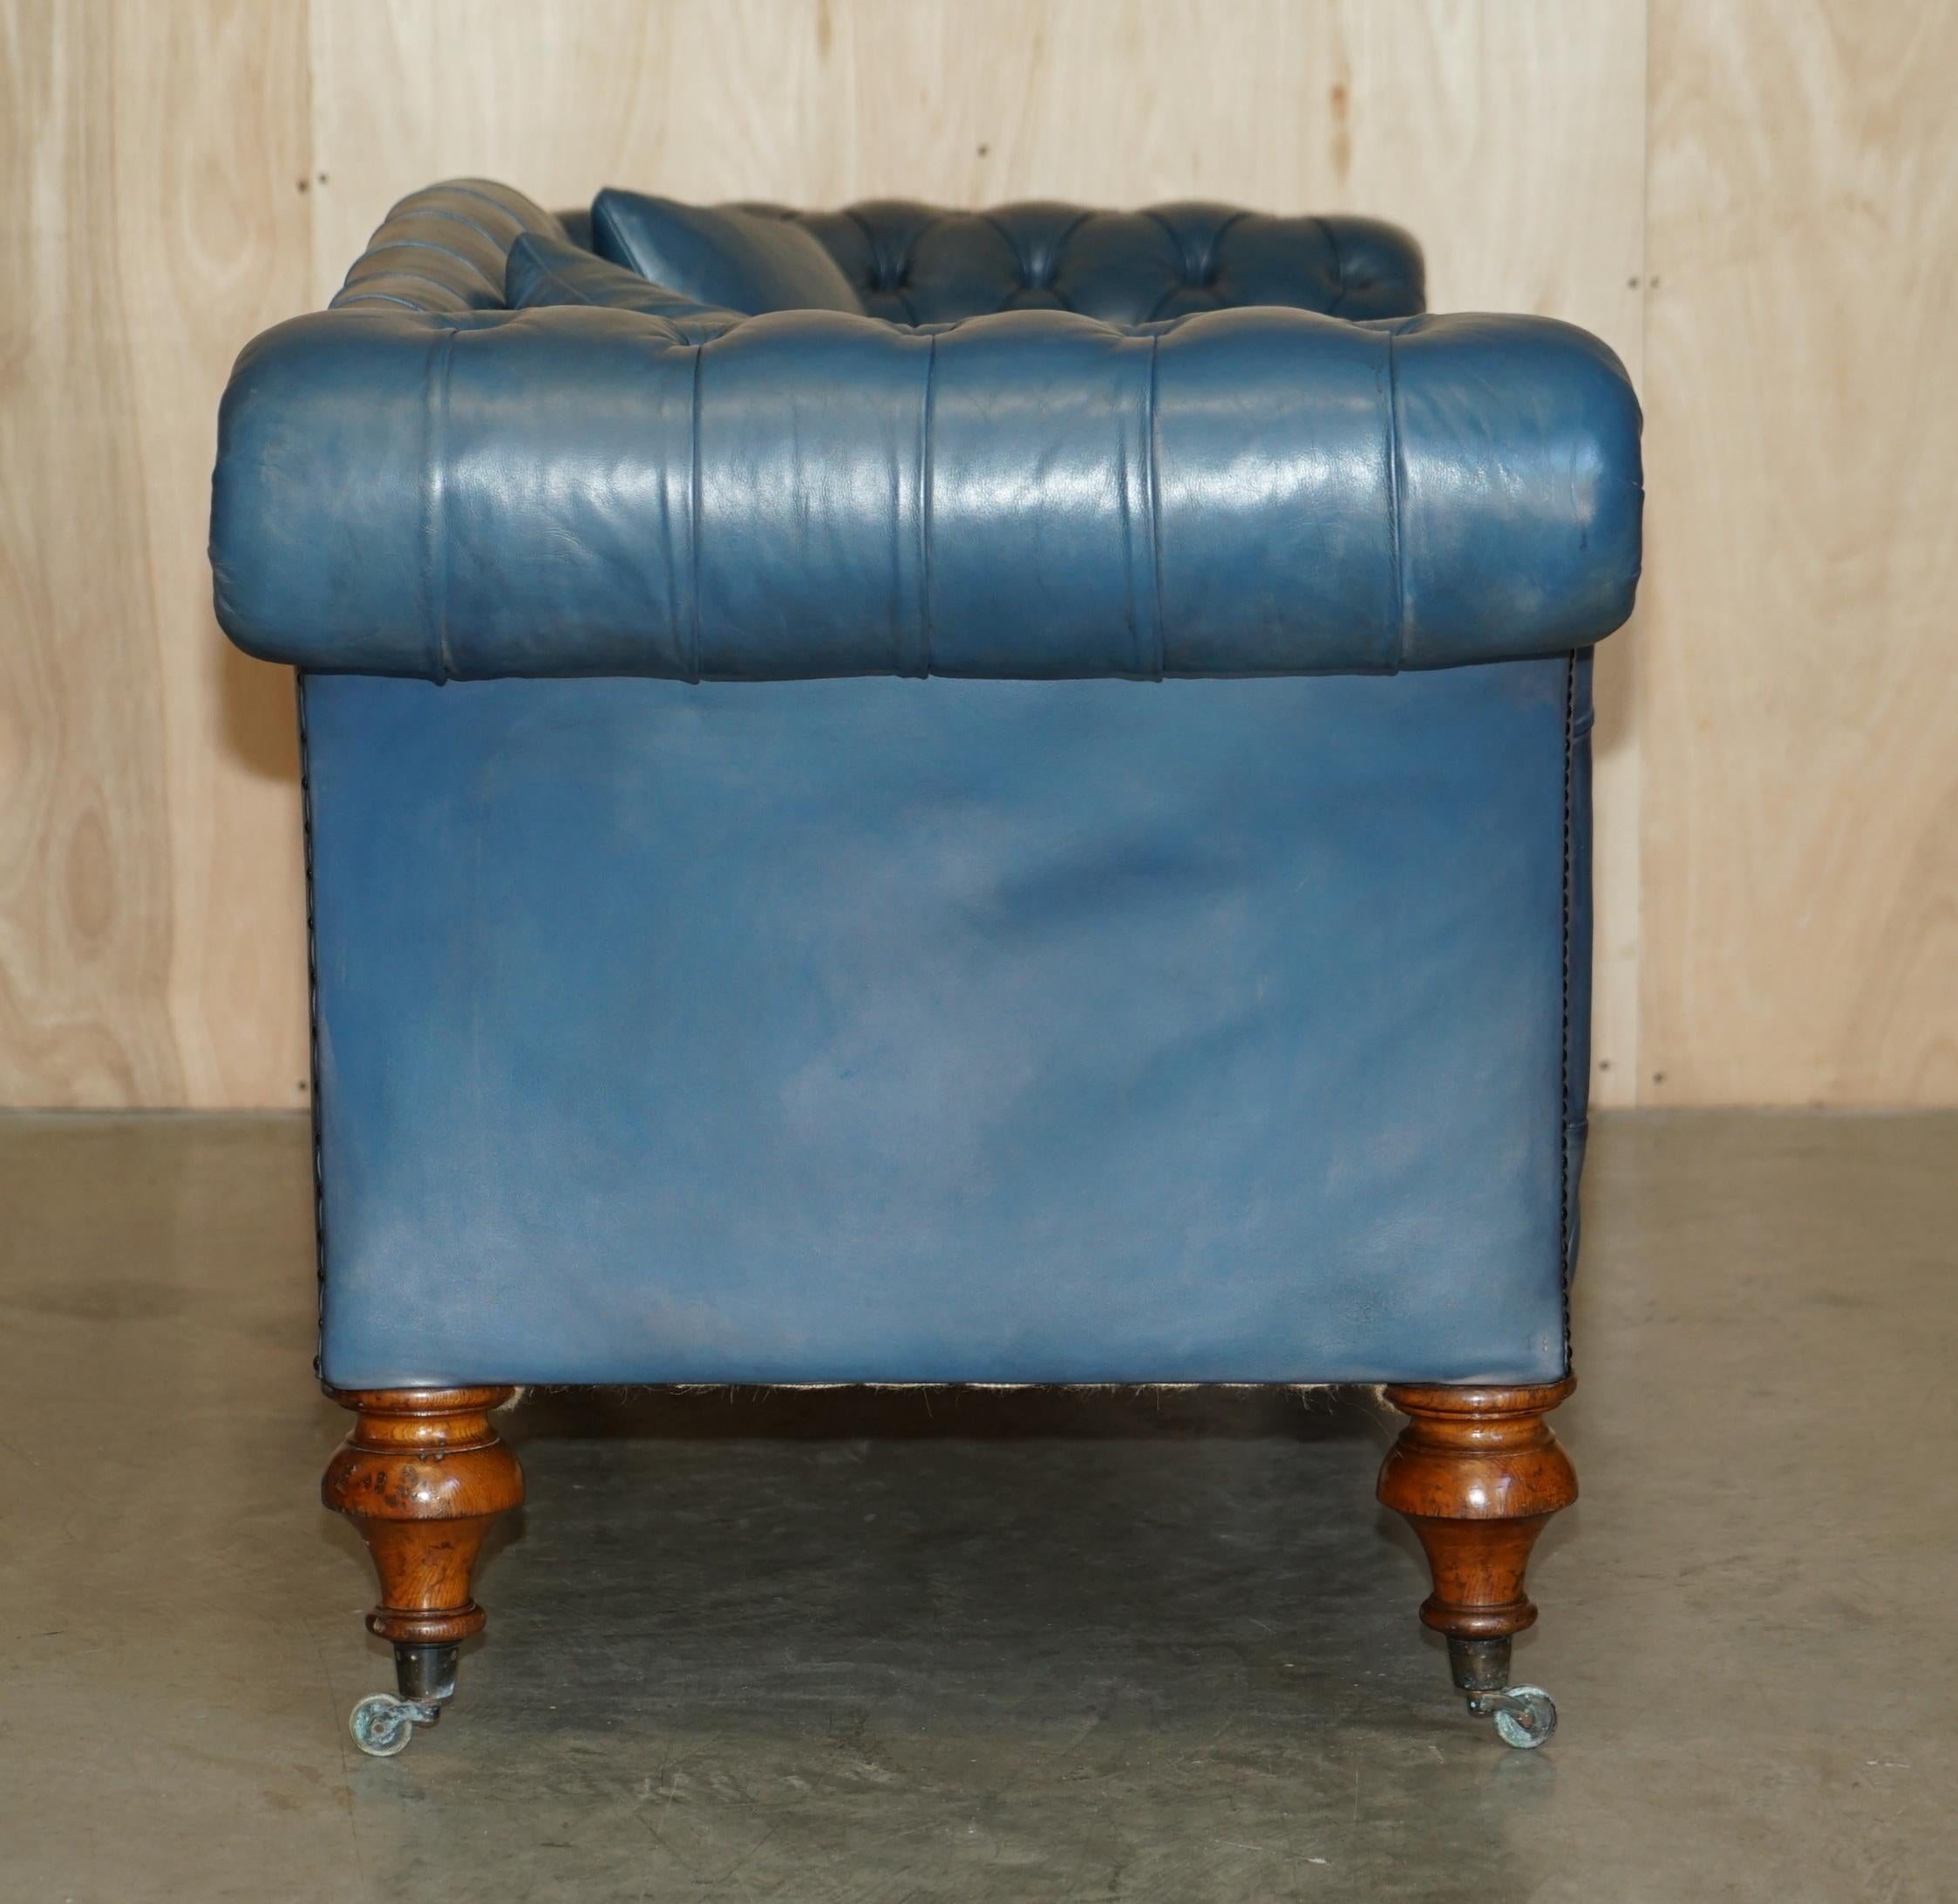 RESTORED WILLIAM IV CIRCA 1830 CHESTERFiELD REGENCY BLUE LEATHER HUMP BACK SOFA For Sale 6